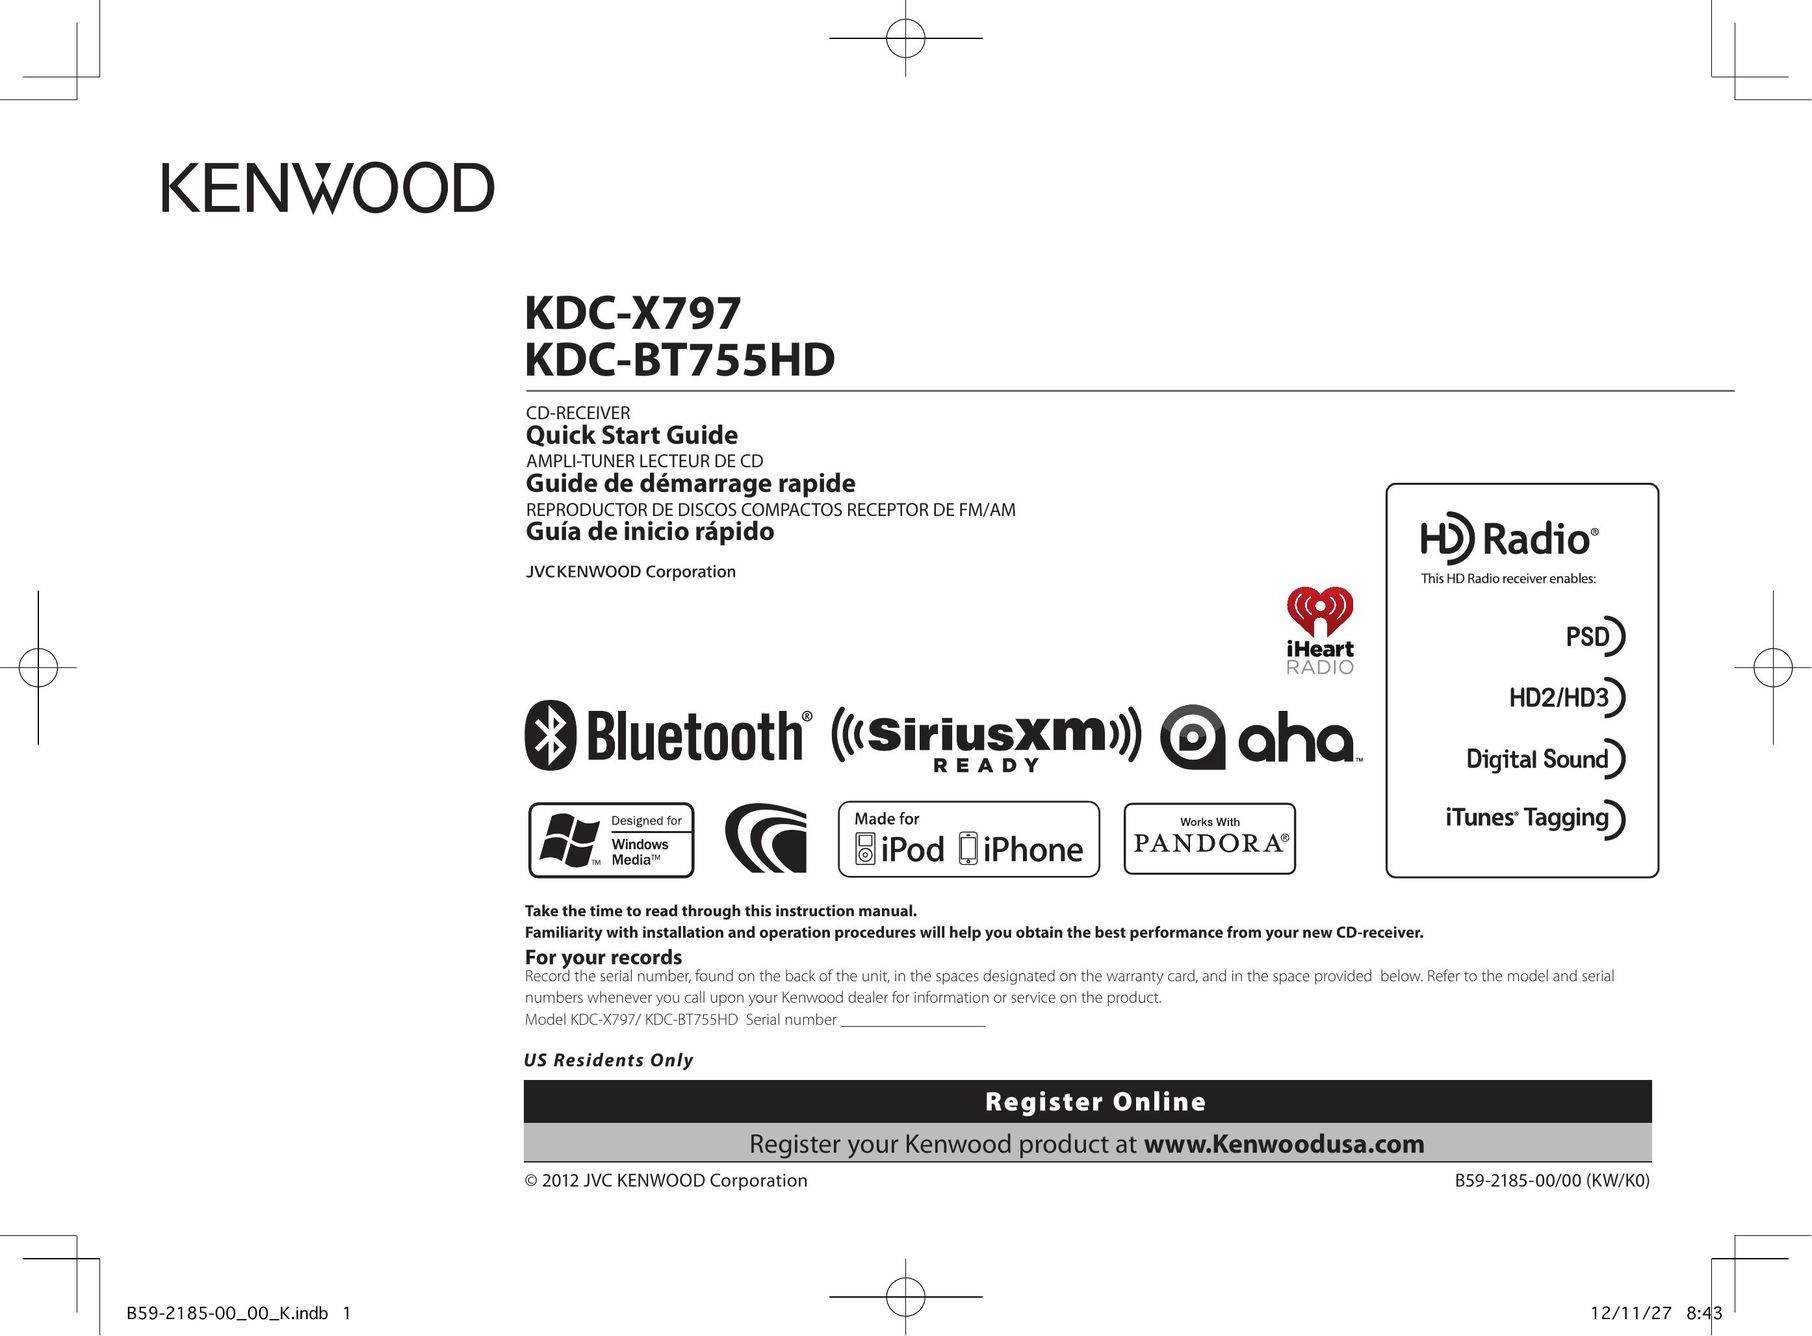 Kenwood KDC-X797 Stereo Receiver User Manual